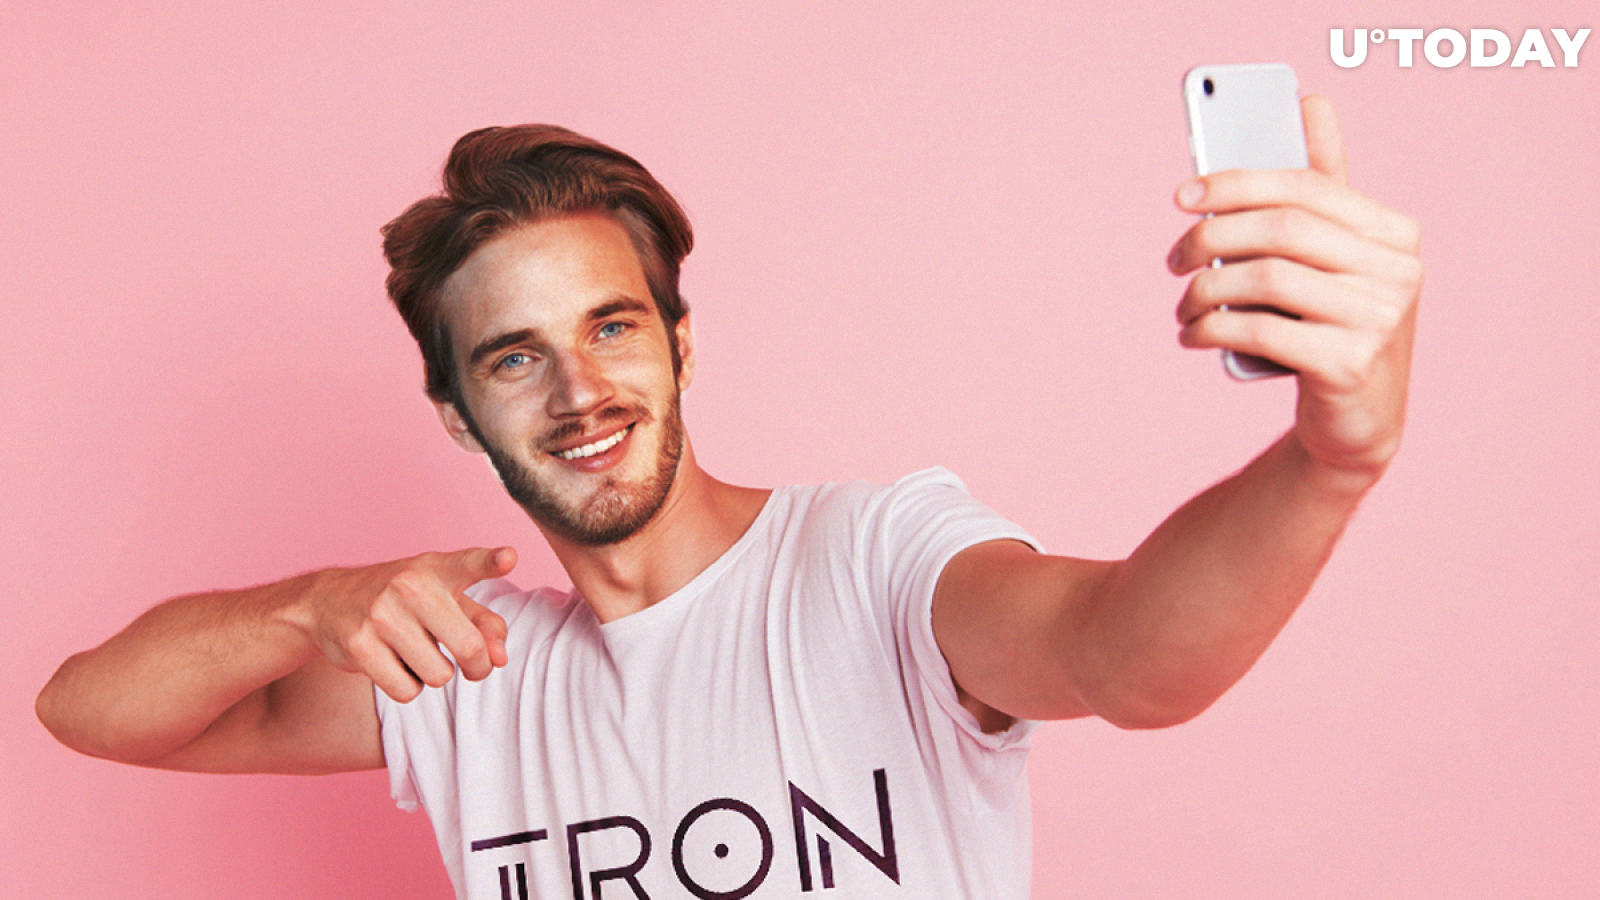 Tron Blockchain Gets Promoted by Number 1 YouTuber PewDiePie